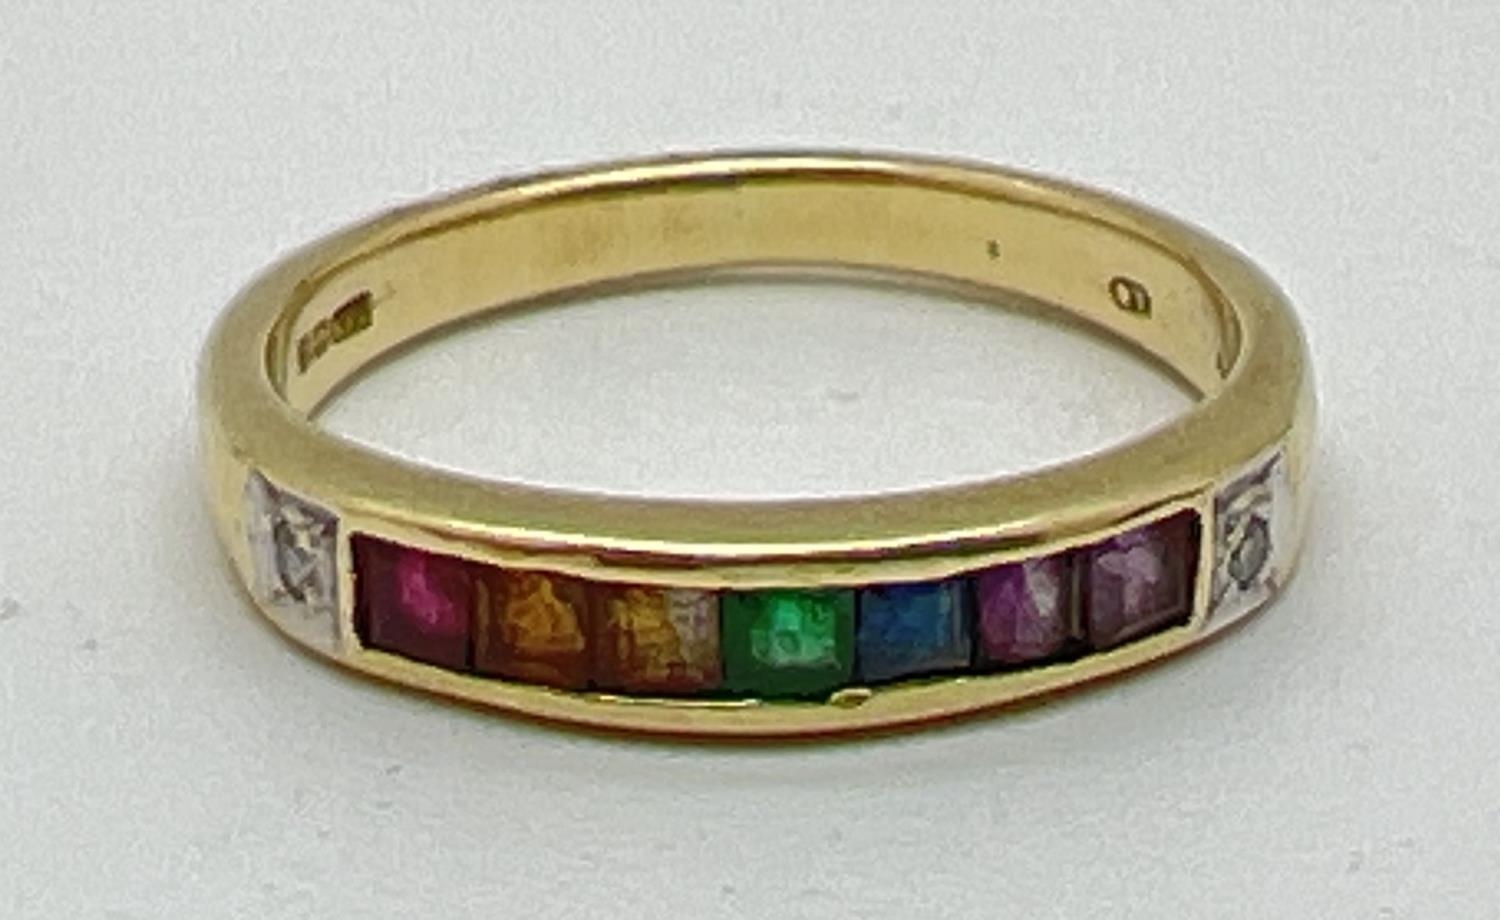 A 14ct gold ring set with 7 square cut channel set rainbow gemstones and flanked by diamonds.